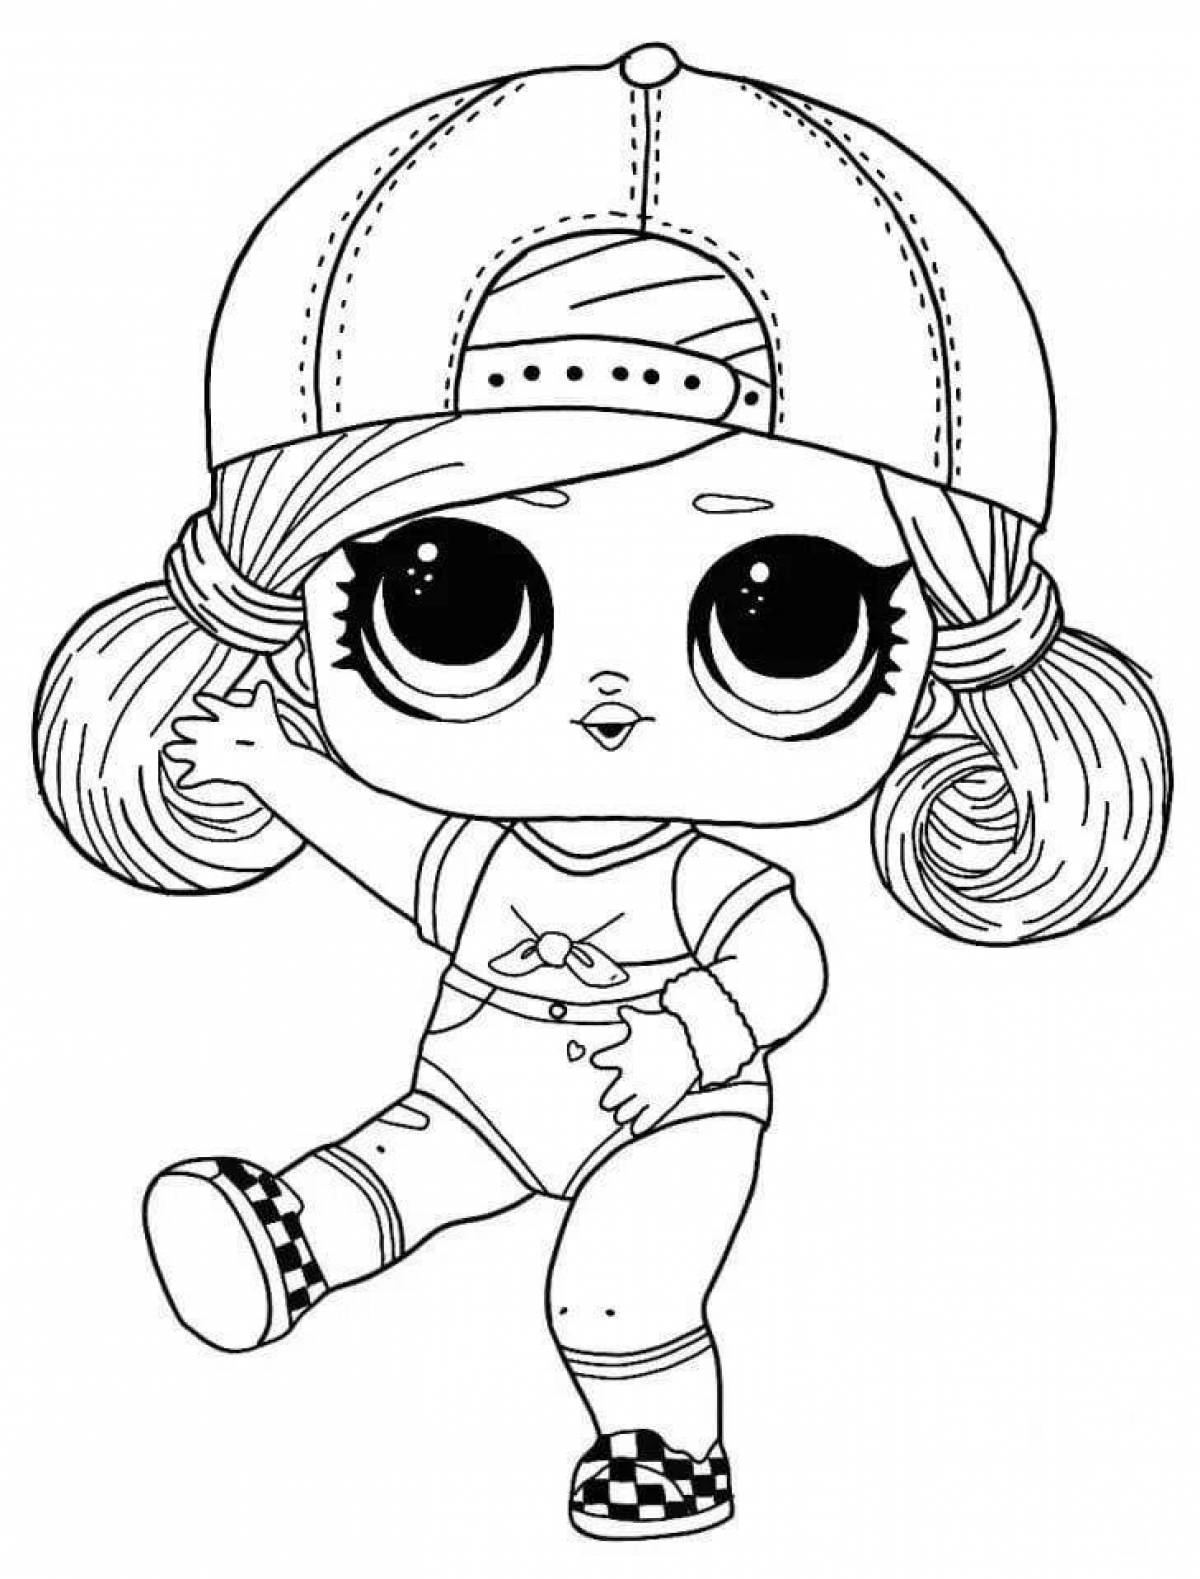 Coloring book for girls Lola doll